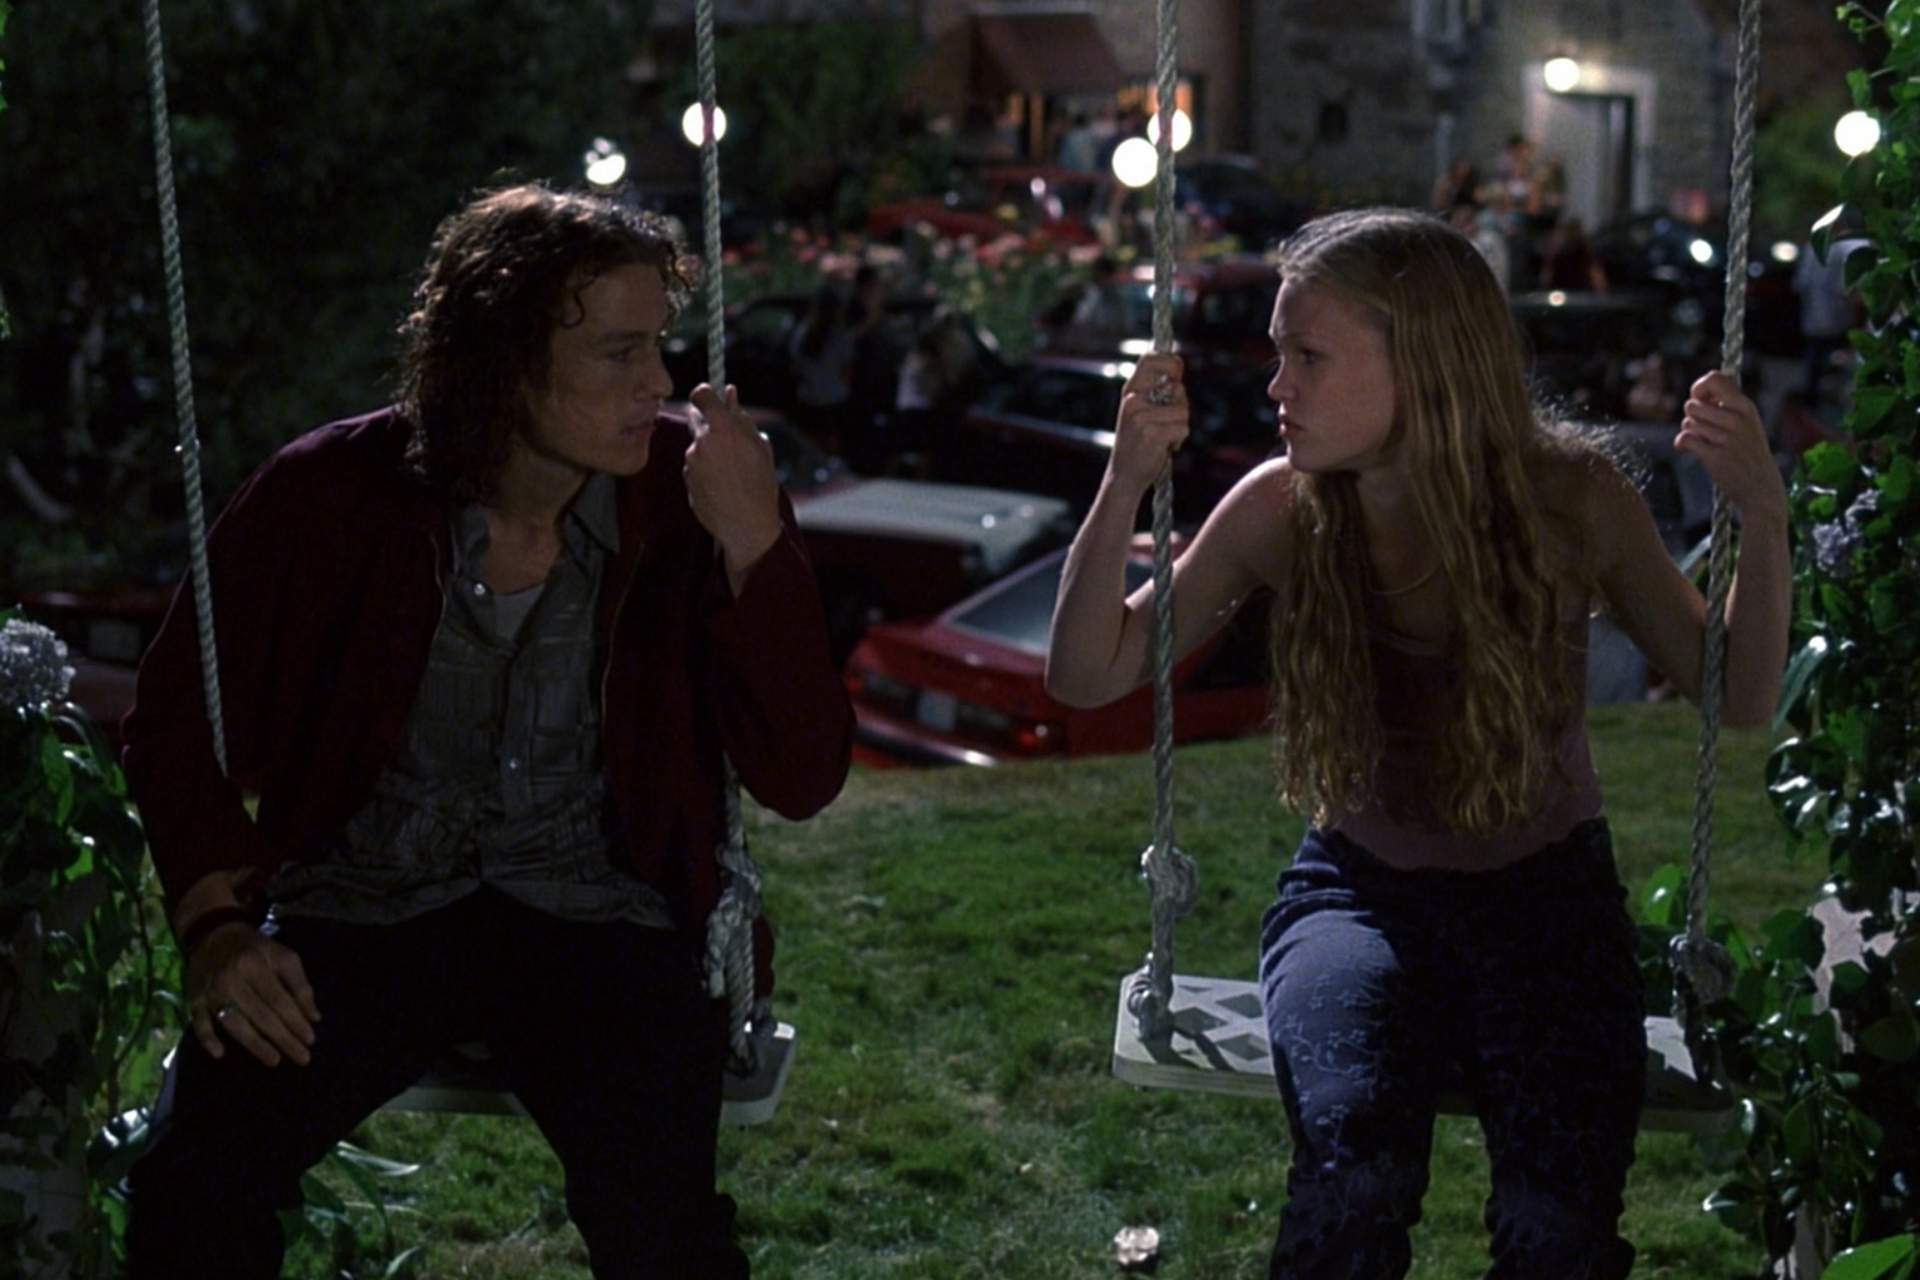 '10 Things I Hate About You' Valentine's Weekend Drive-In Screening